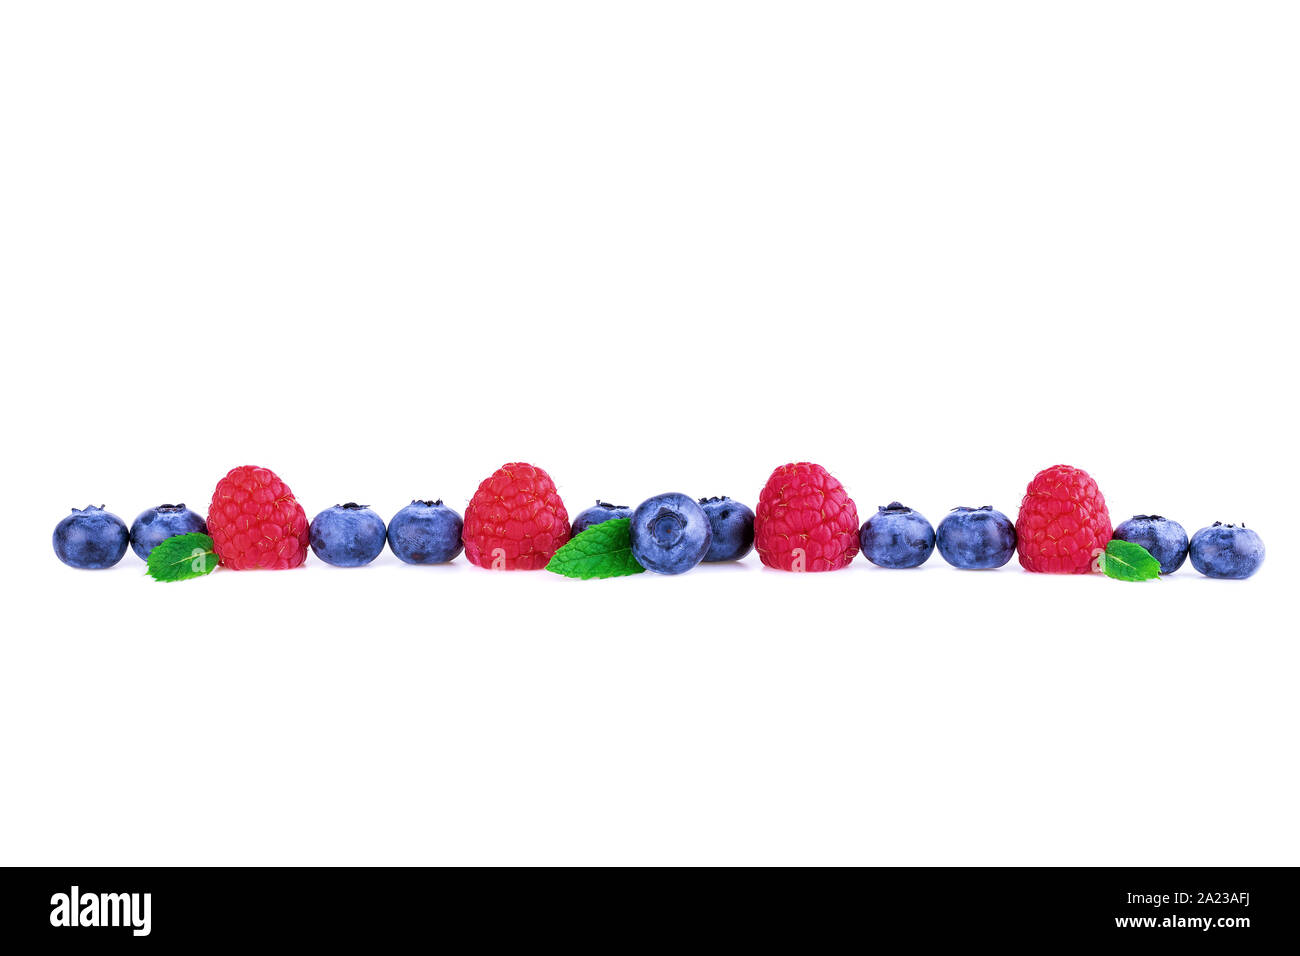 Raspberries and Blueberries in a line isolated on white. Fresh berry mix concept. Stock Photo